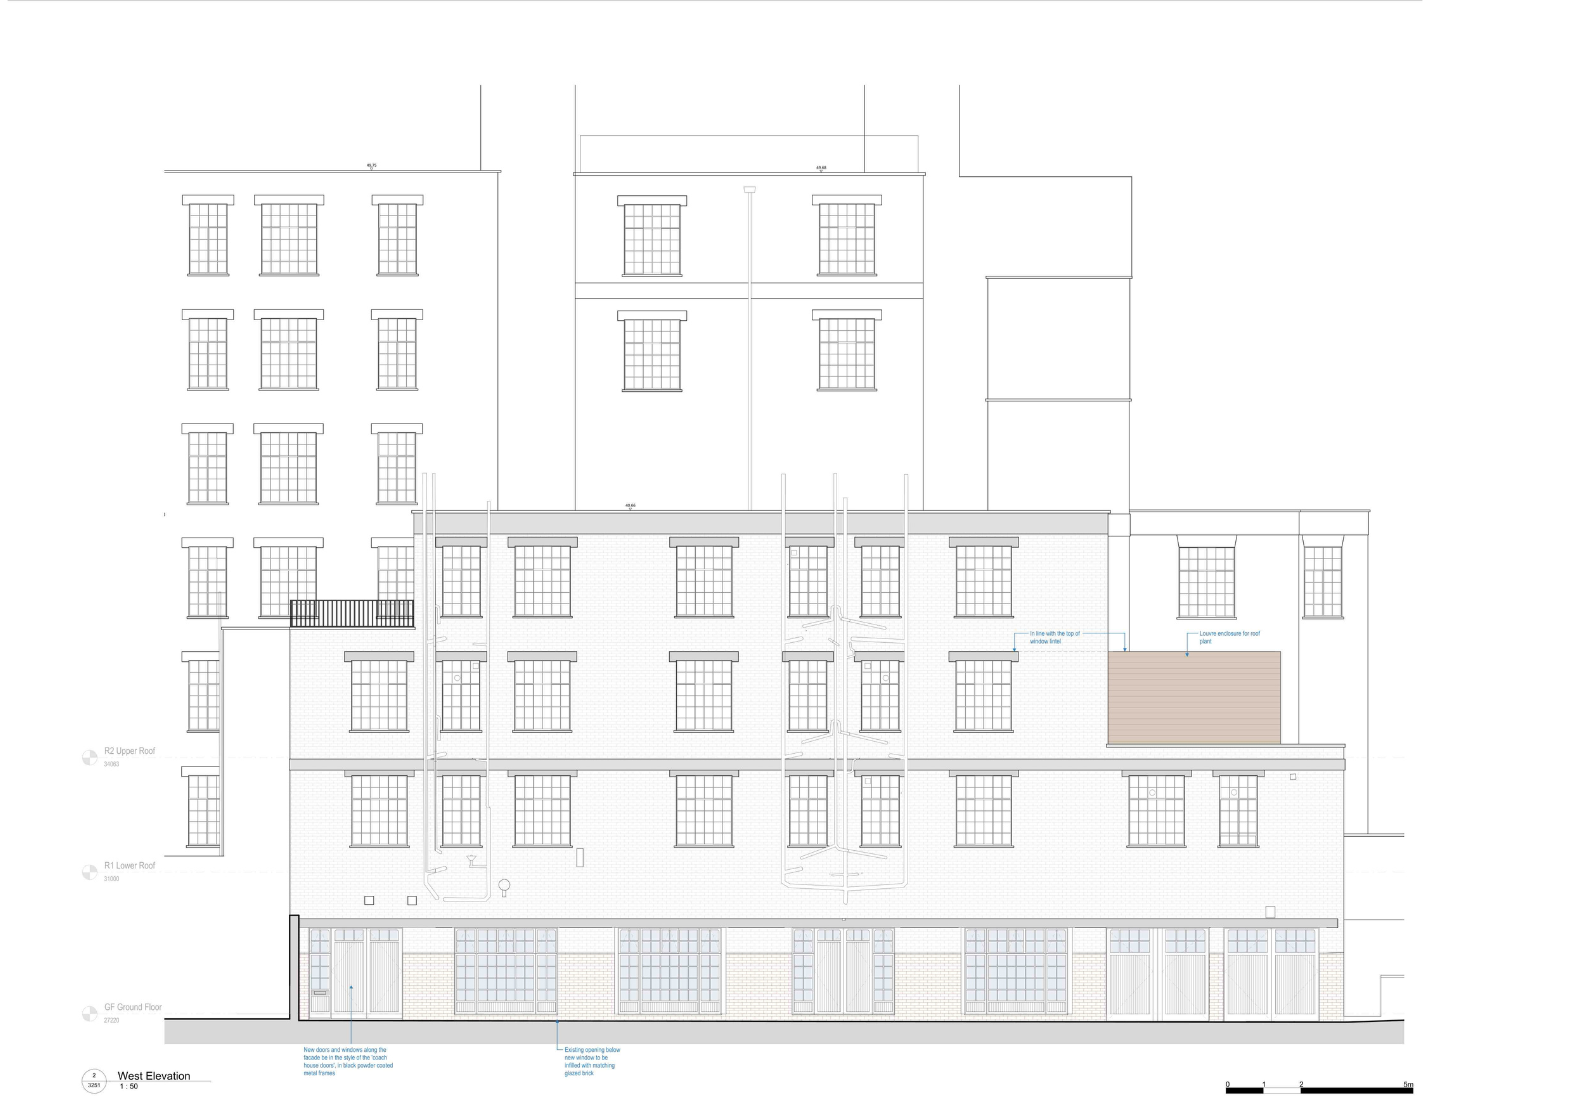 Planning Permission at Mews Site